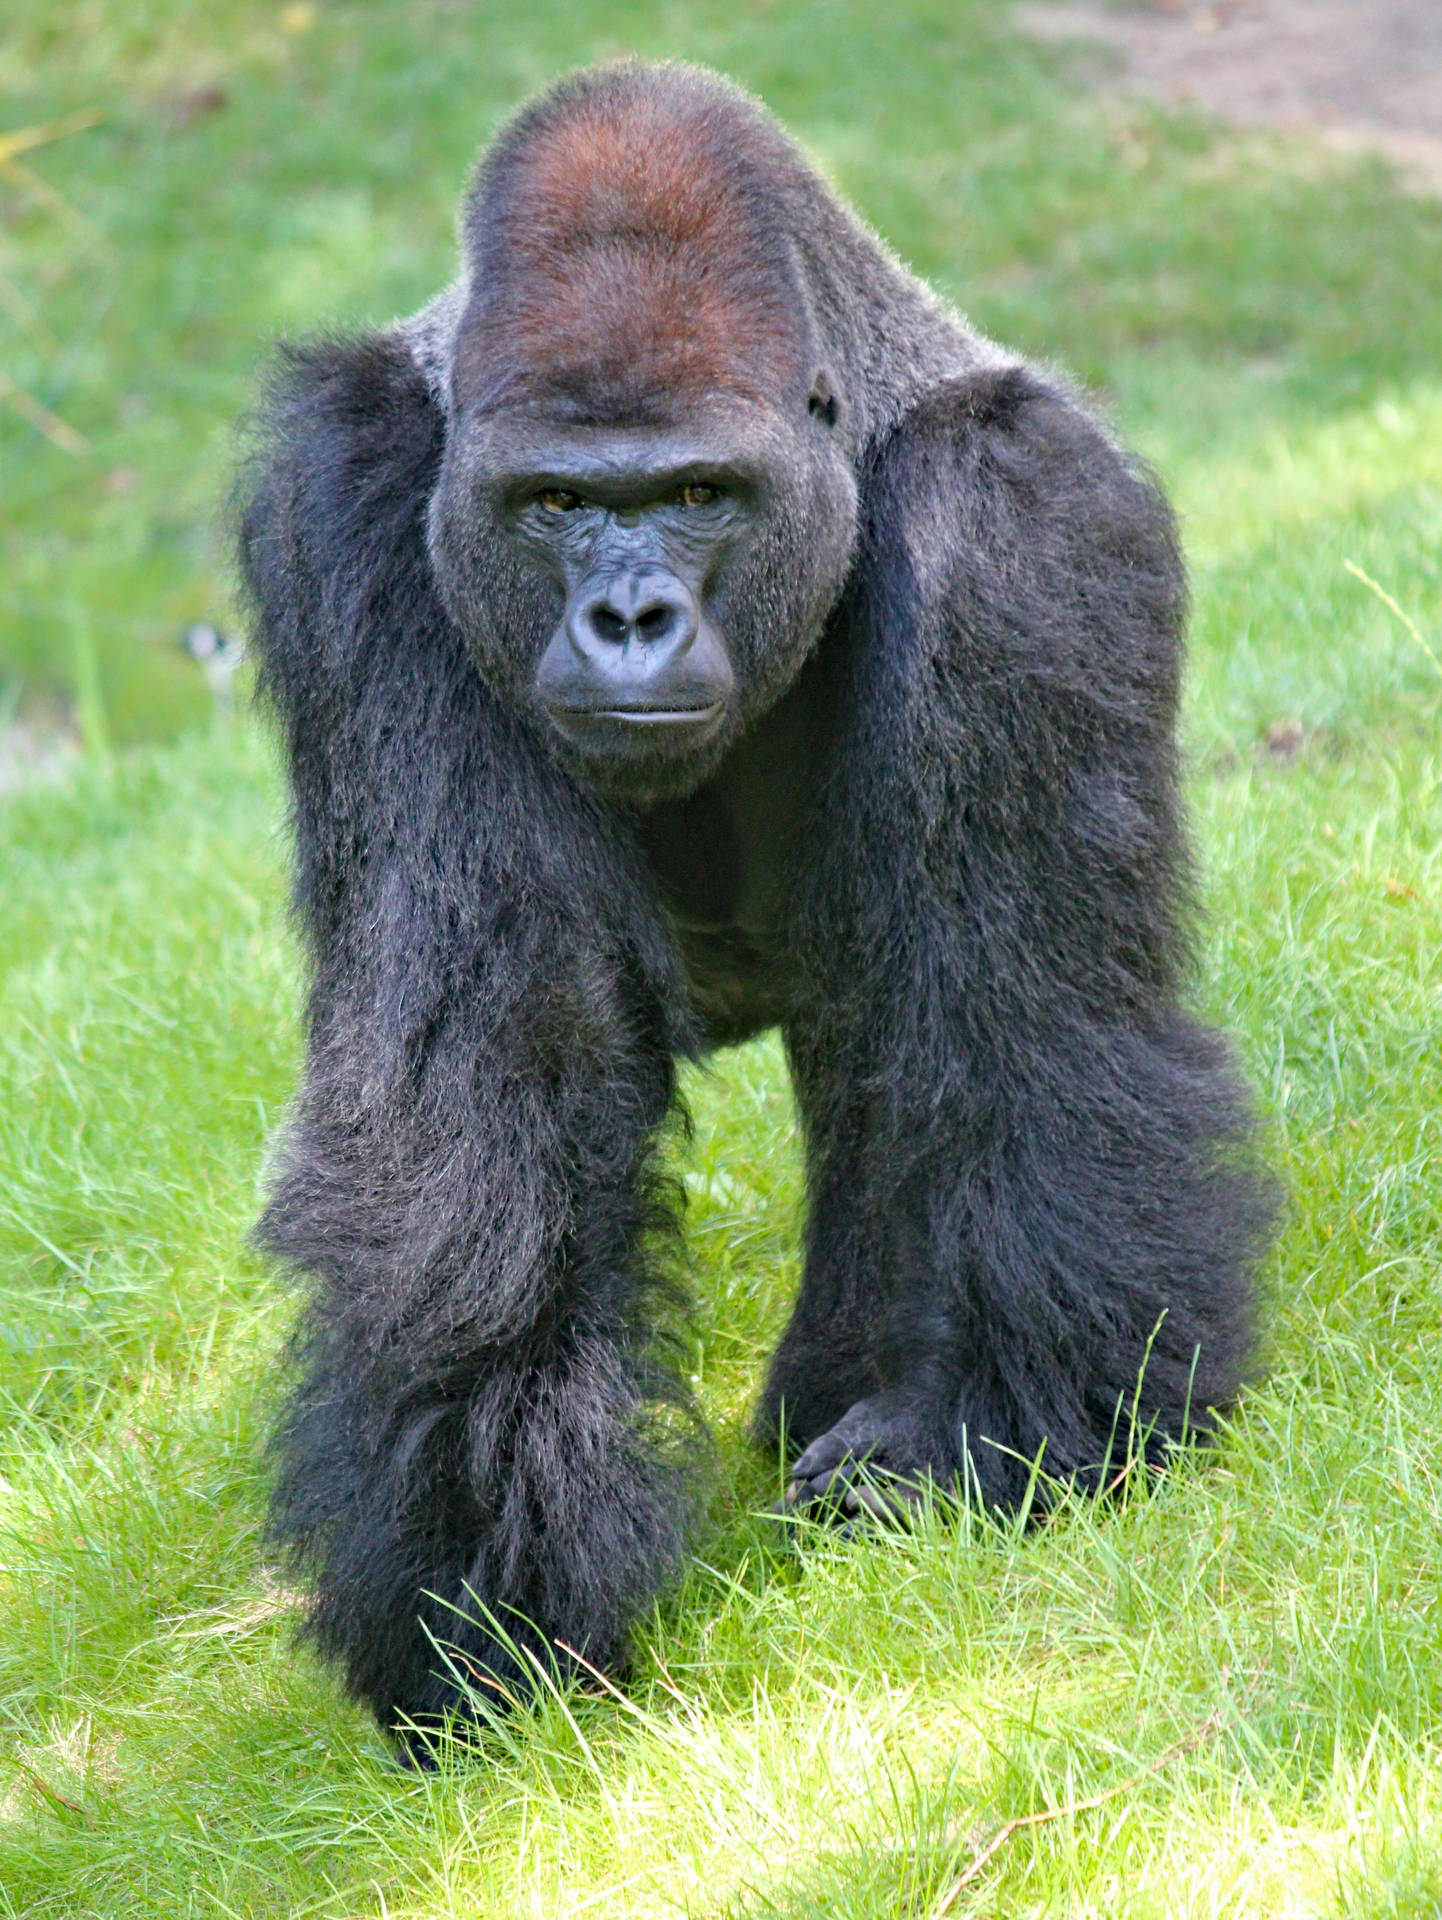 Gorilla 3408X4537 Wallpaper and Background Image